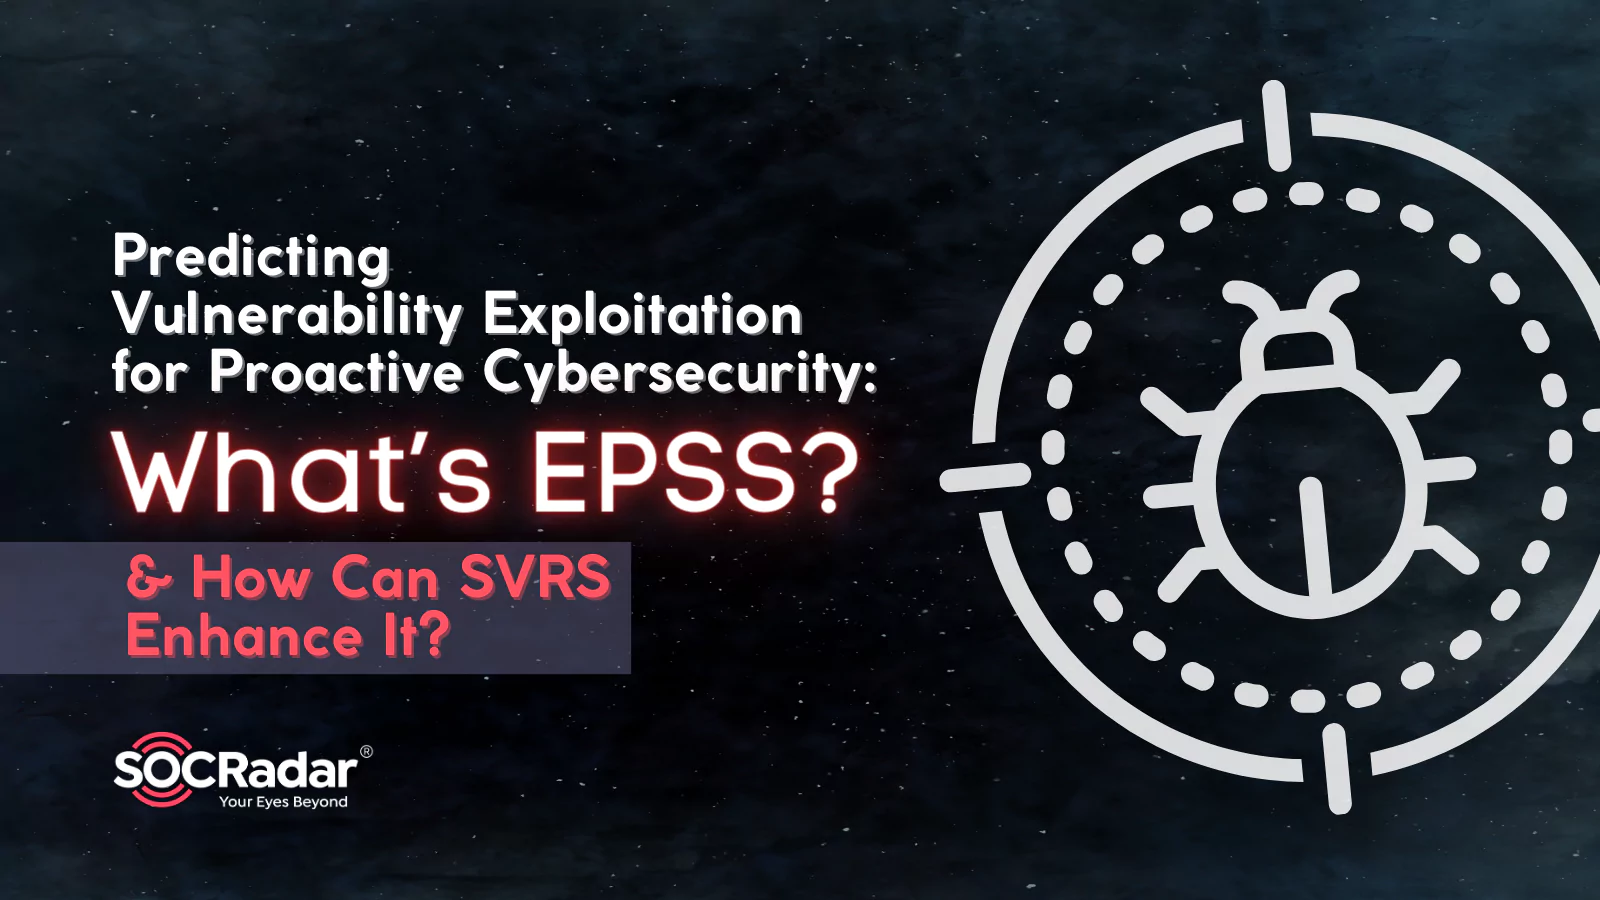 SOCRadar® Cyber Intelligence Inc. | Predicting Vulnerability Exploitation for Proactive Cybersecurity: What’s EPSS, and How Can SVRS Enhance It?